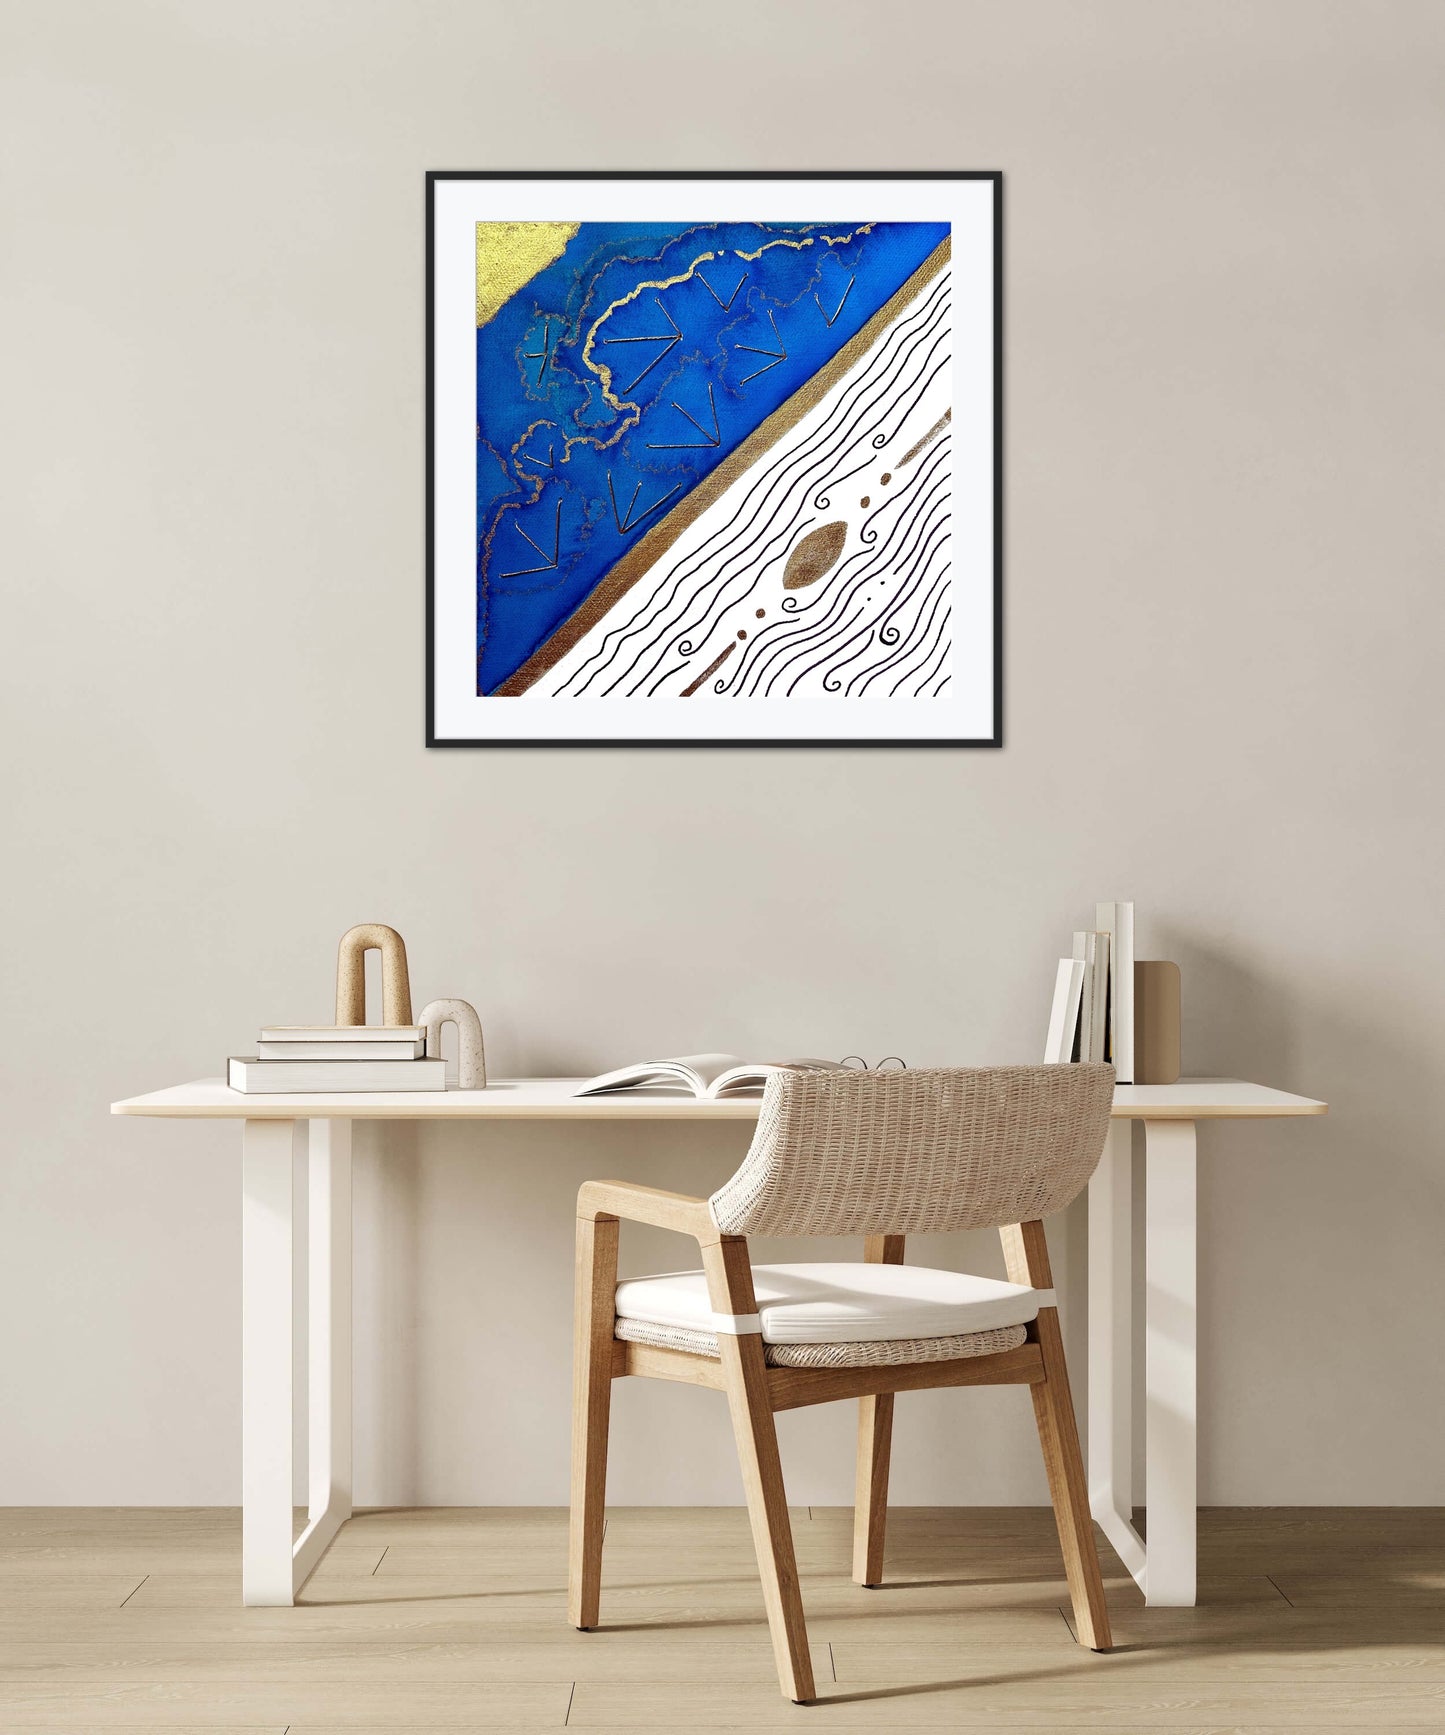 'Sea Sky' Embellished Art Print - Signed By the Artist - Limited Edition